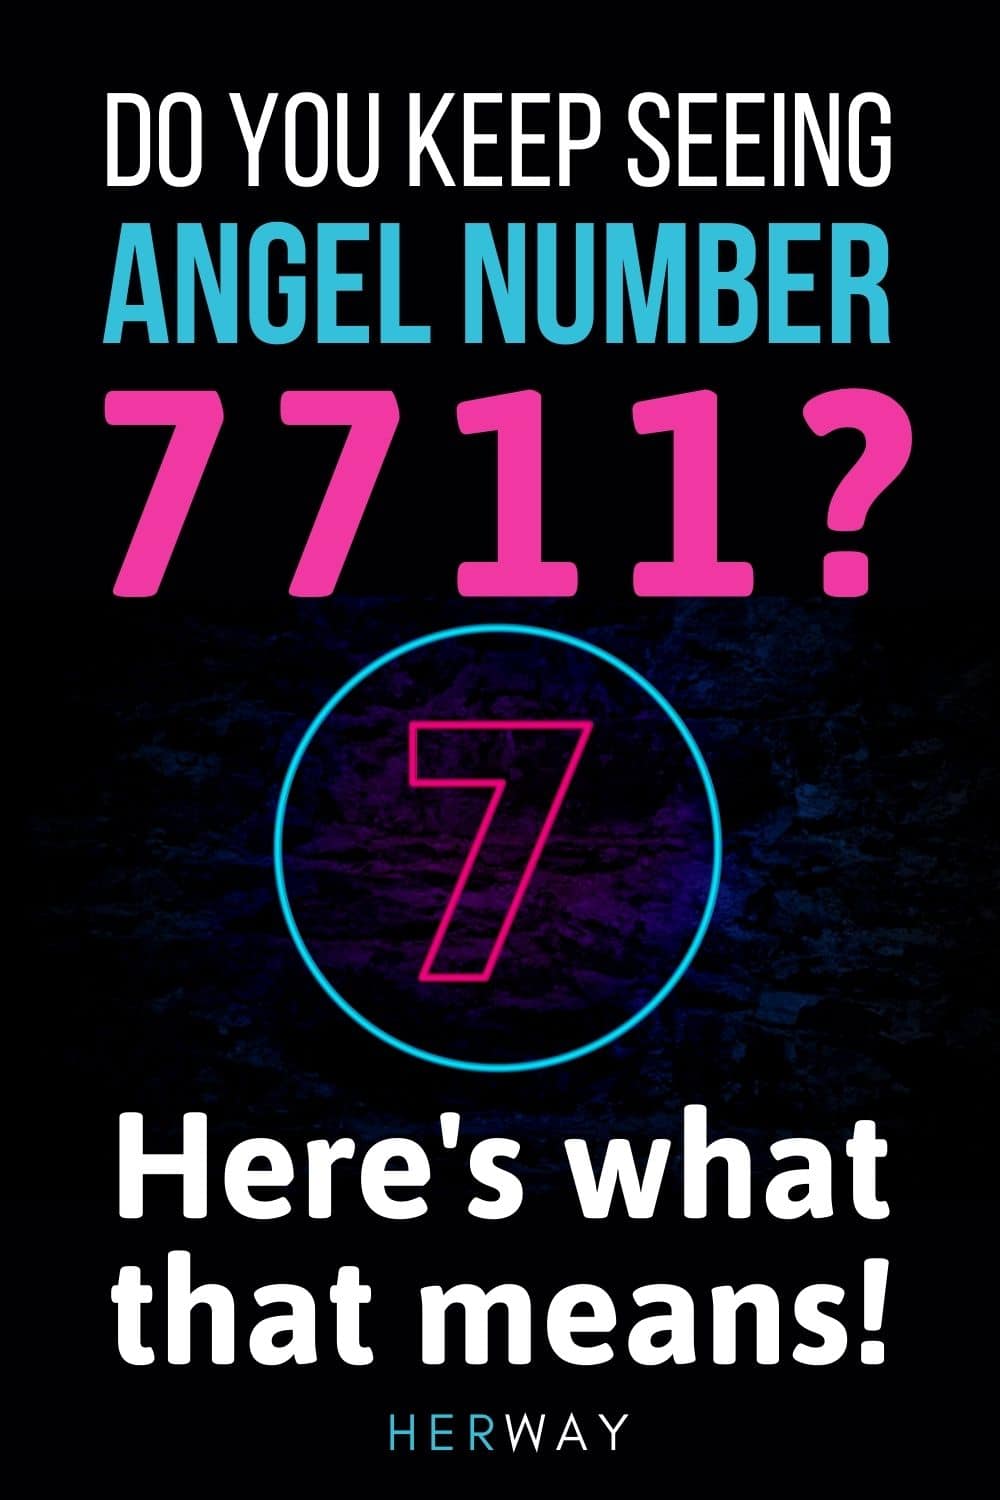 7711 Angel Number Meaning And Why You Keep Seeing It Pinterest